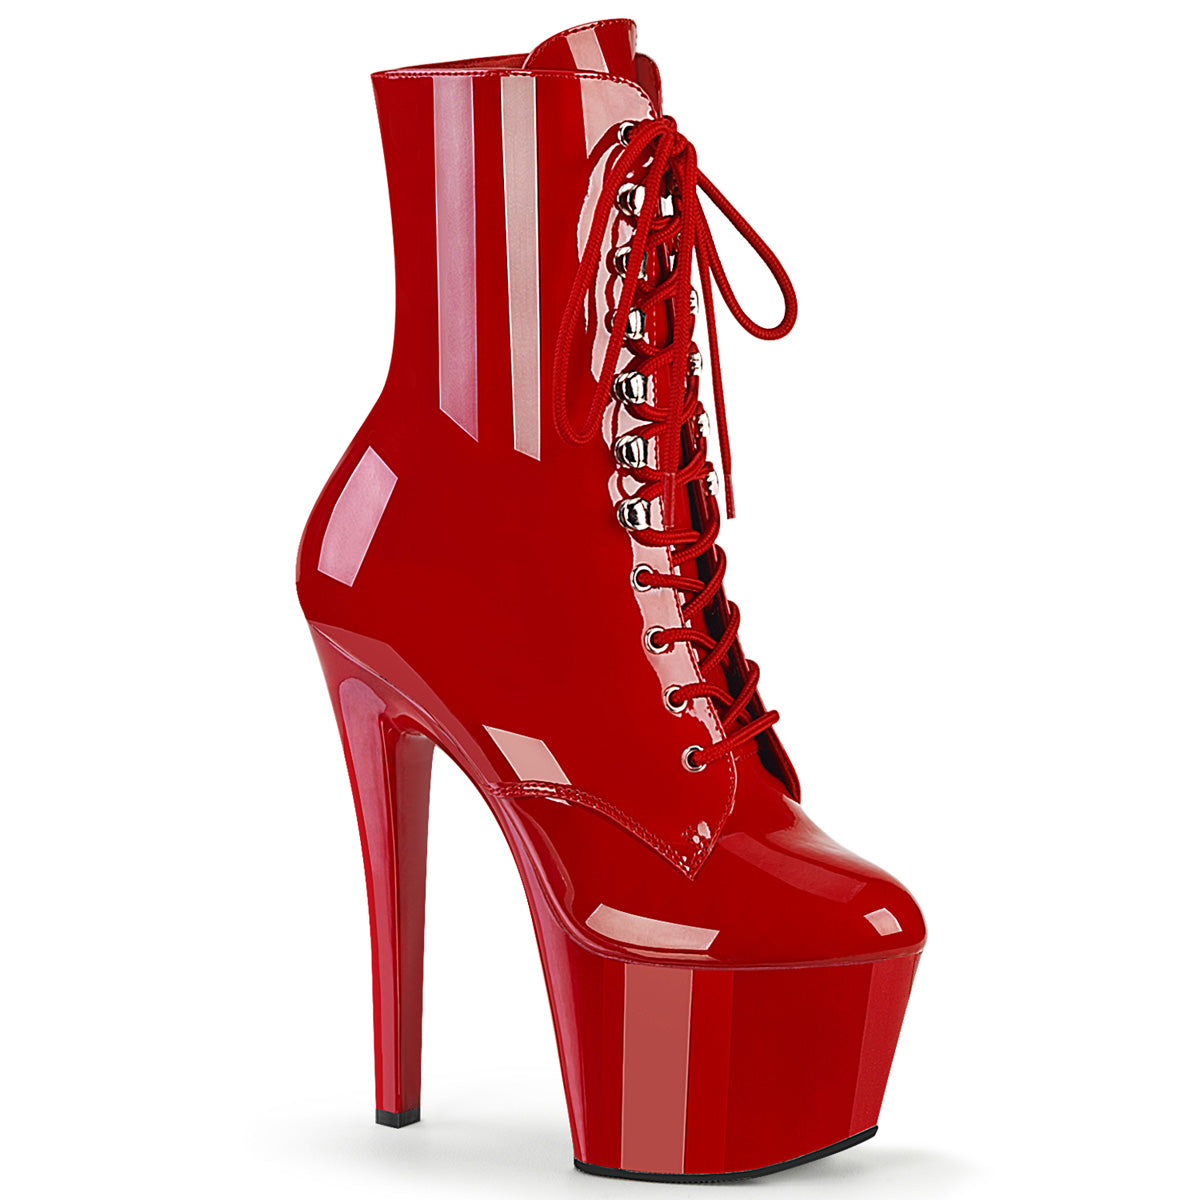 Pleaser SKY-1020 Red Pat 7 Inch (178mm) Heel, 2 3/4 Inch (70mm) Platform Lace-Up Front Ankle Boot, Inside Zip Closure